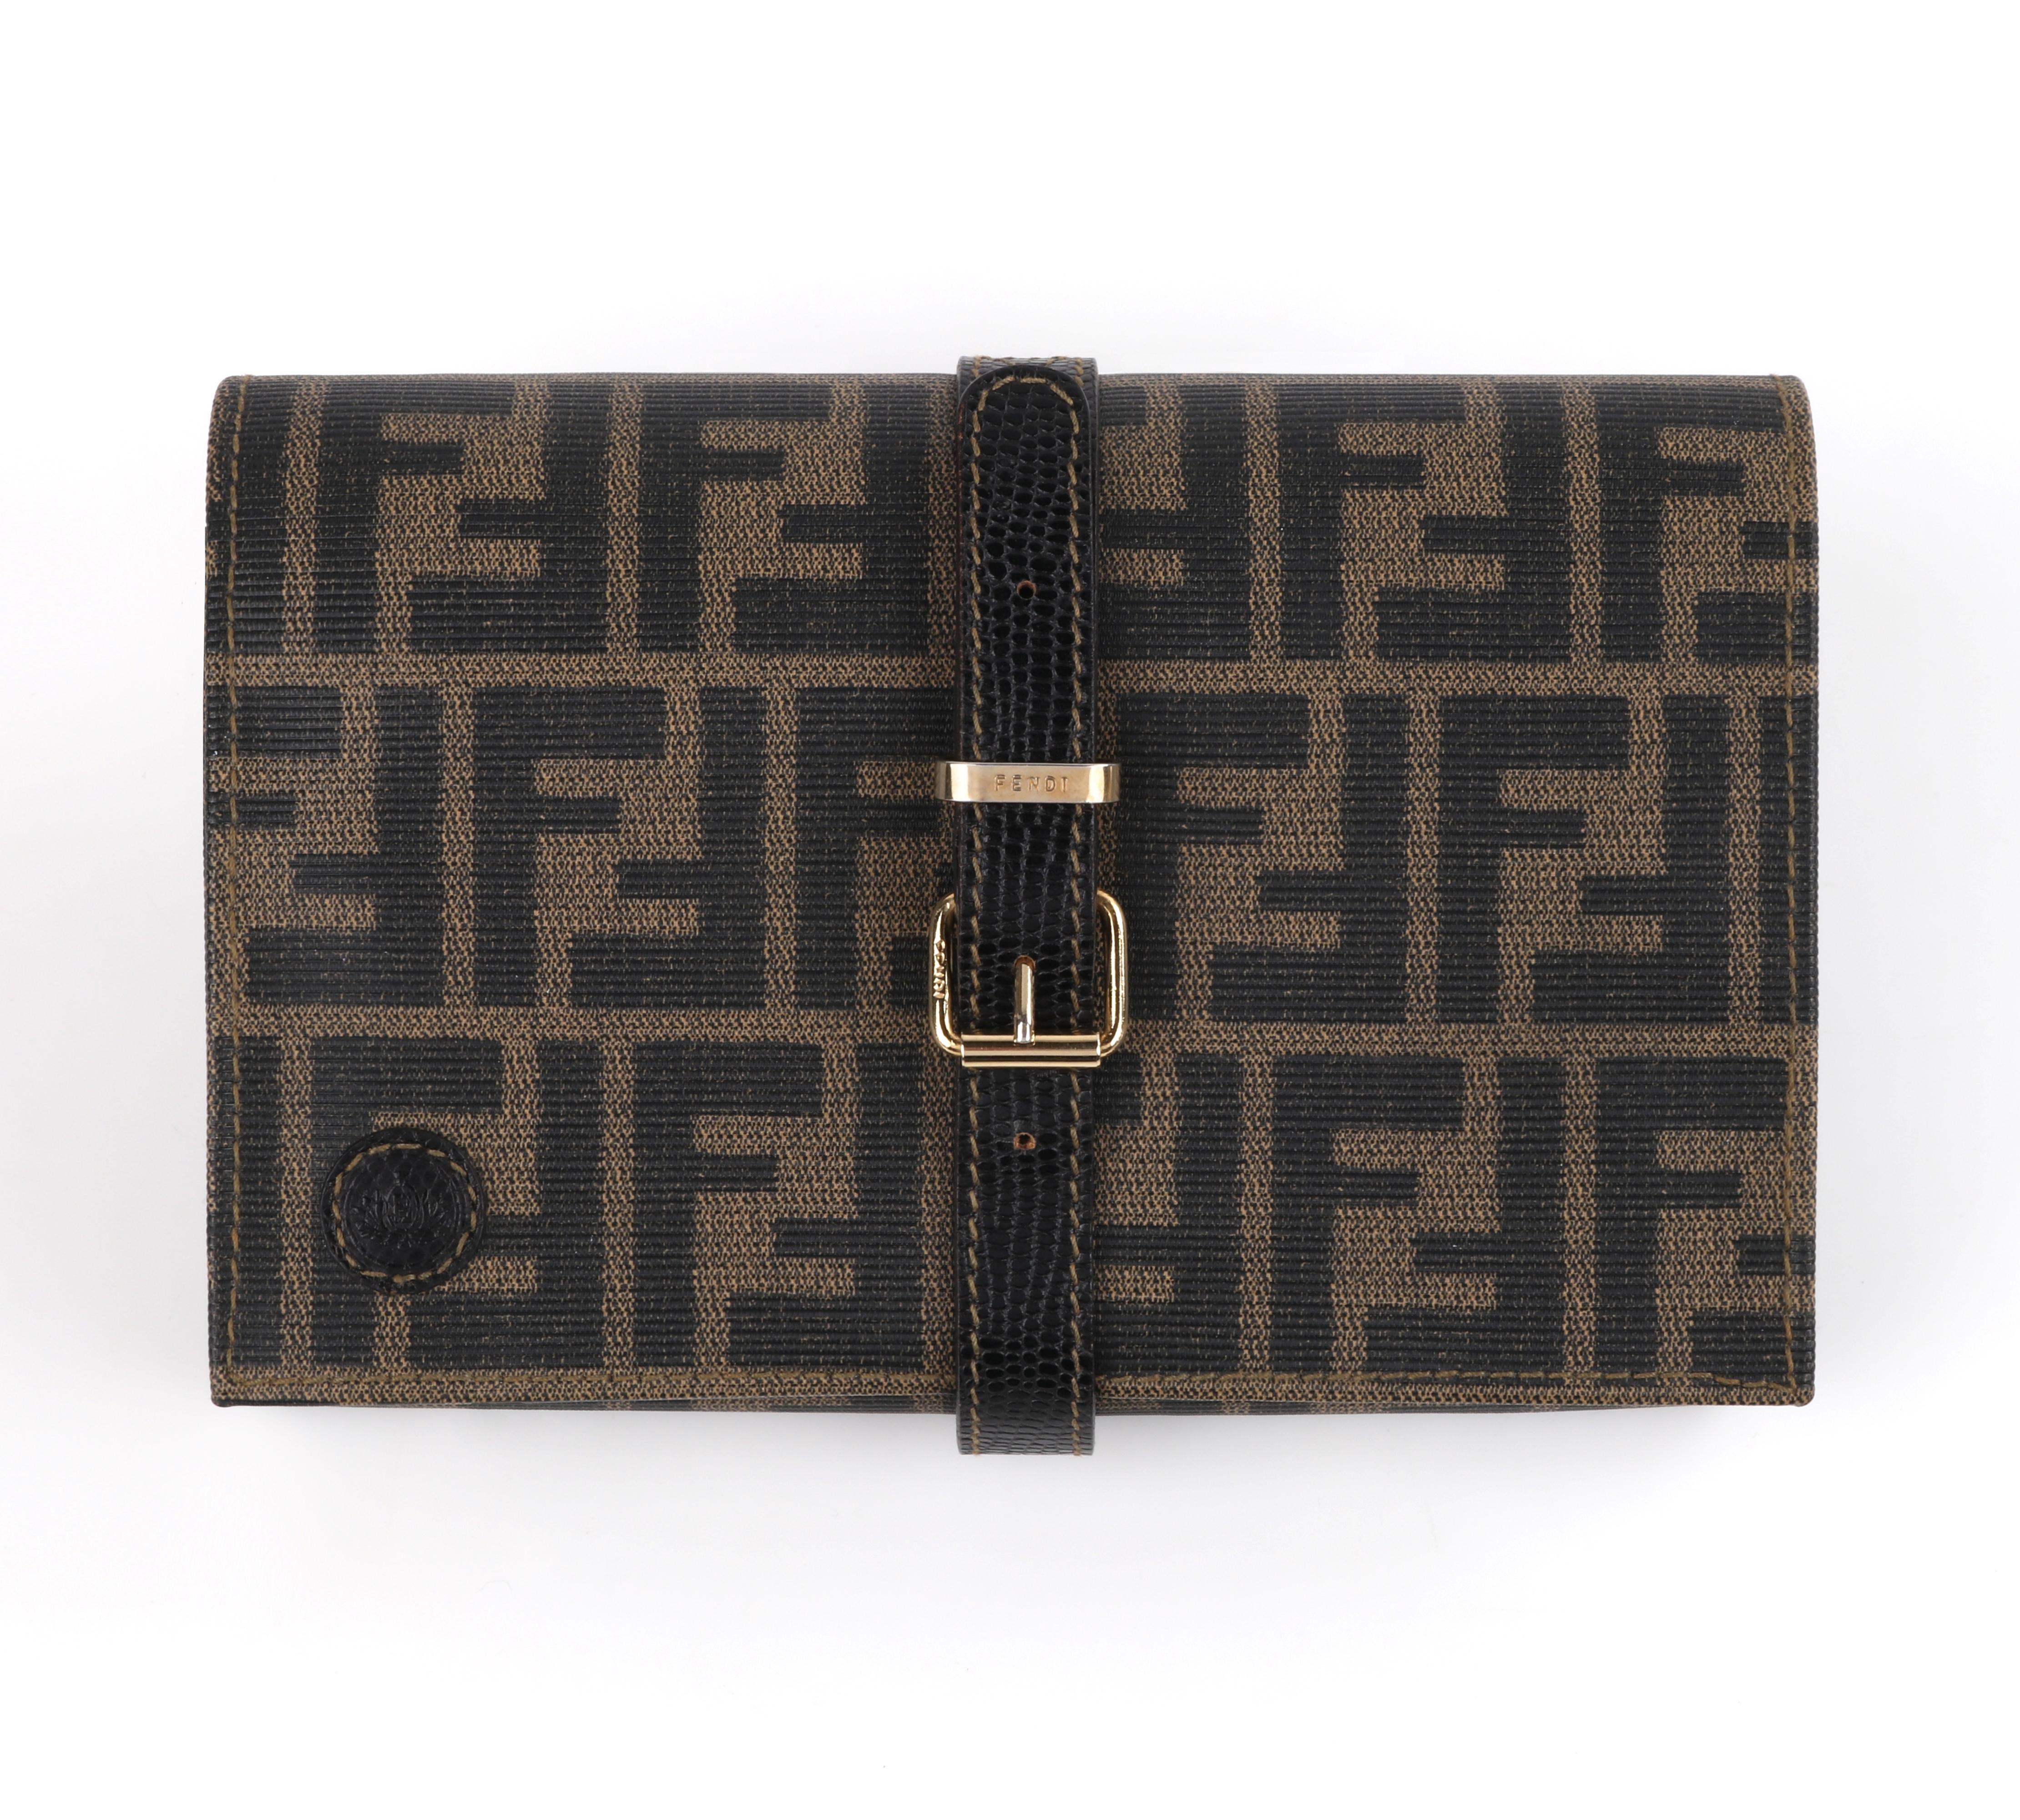 FENDI Vintage Zucca Buckle Strap Clutch Handbag Detachable Pochette Pouch Bag Jewelry Travel Roll
 
Brand/Manufacturer: Fendi
Style: Clutch/Jewelry roll
Color(s): Shades of taupe, brown, and black; gold (hardware)
Lined: No
Unmarked Fabric Content